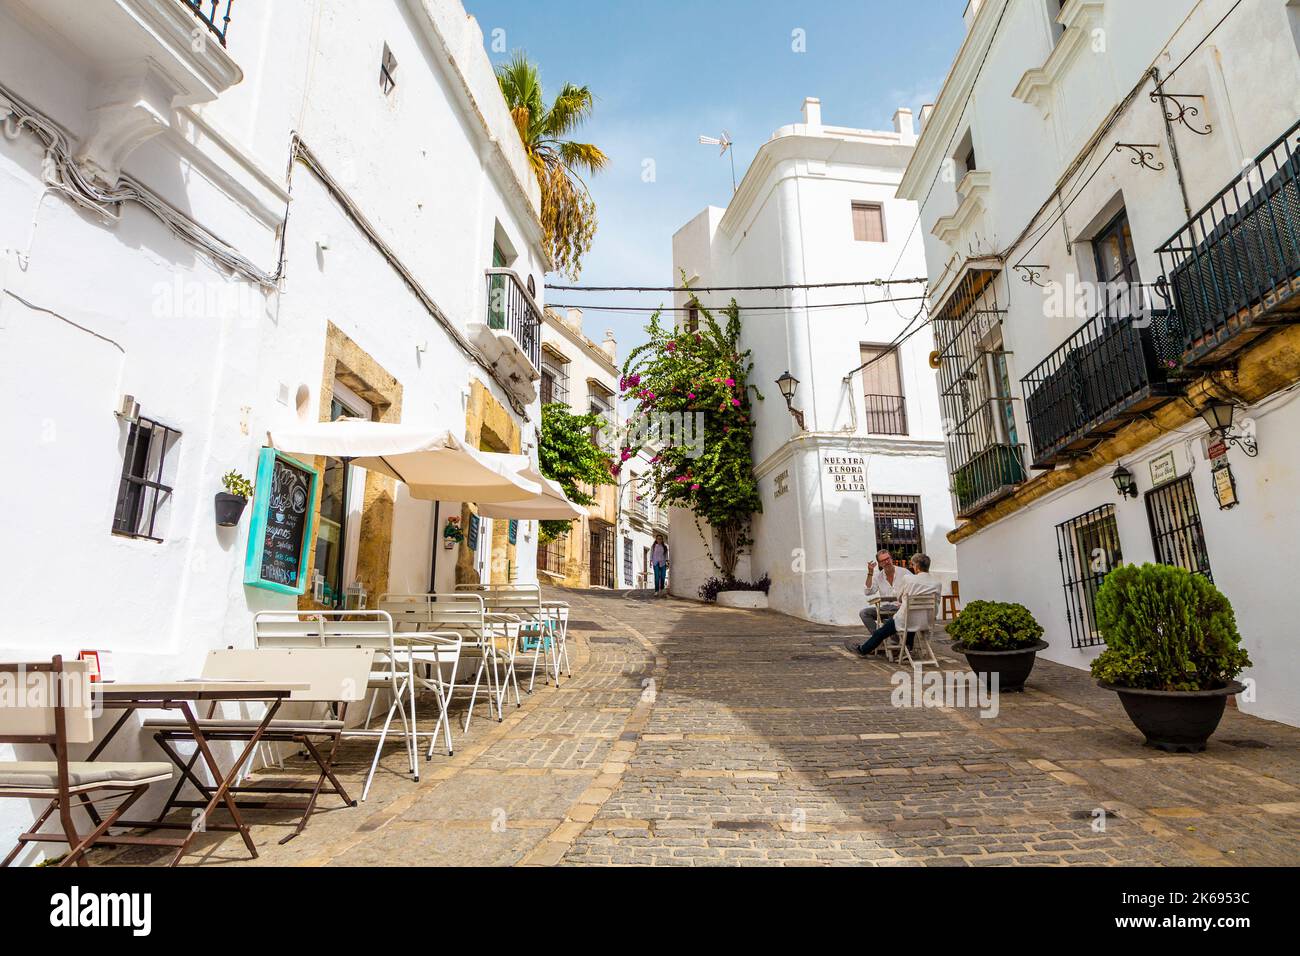 Street with whitewashed houses and restaurants, Vejer de la Frontera, Andalusia, Spain Stock Photo